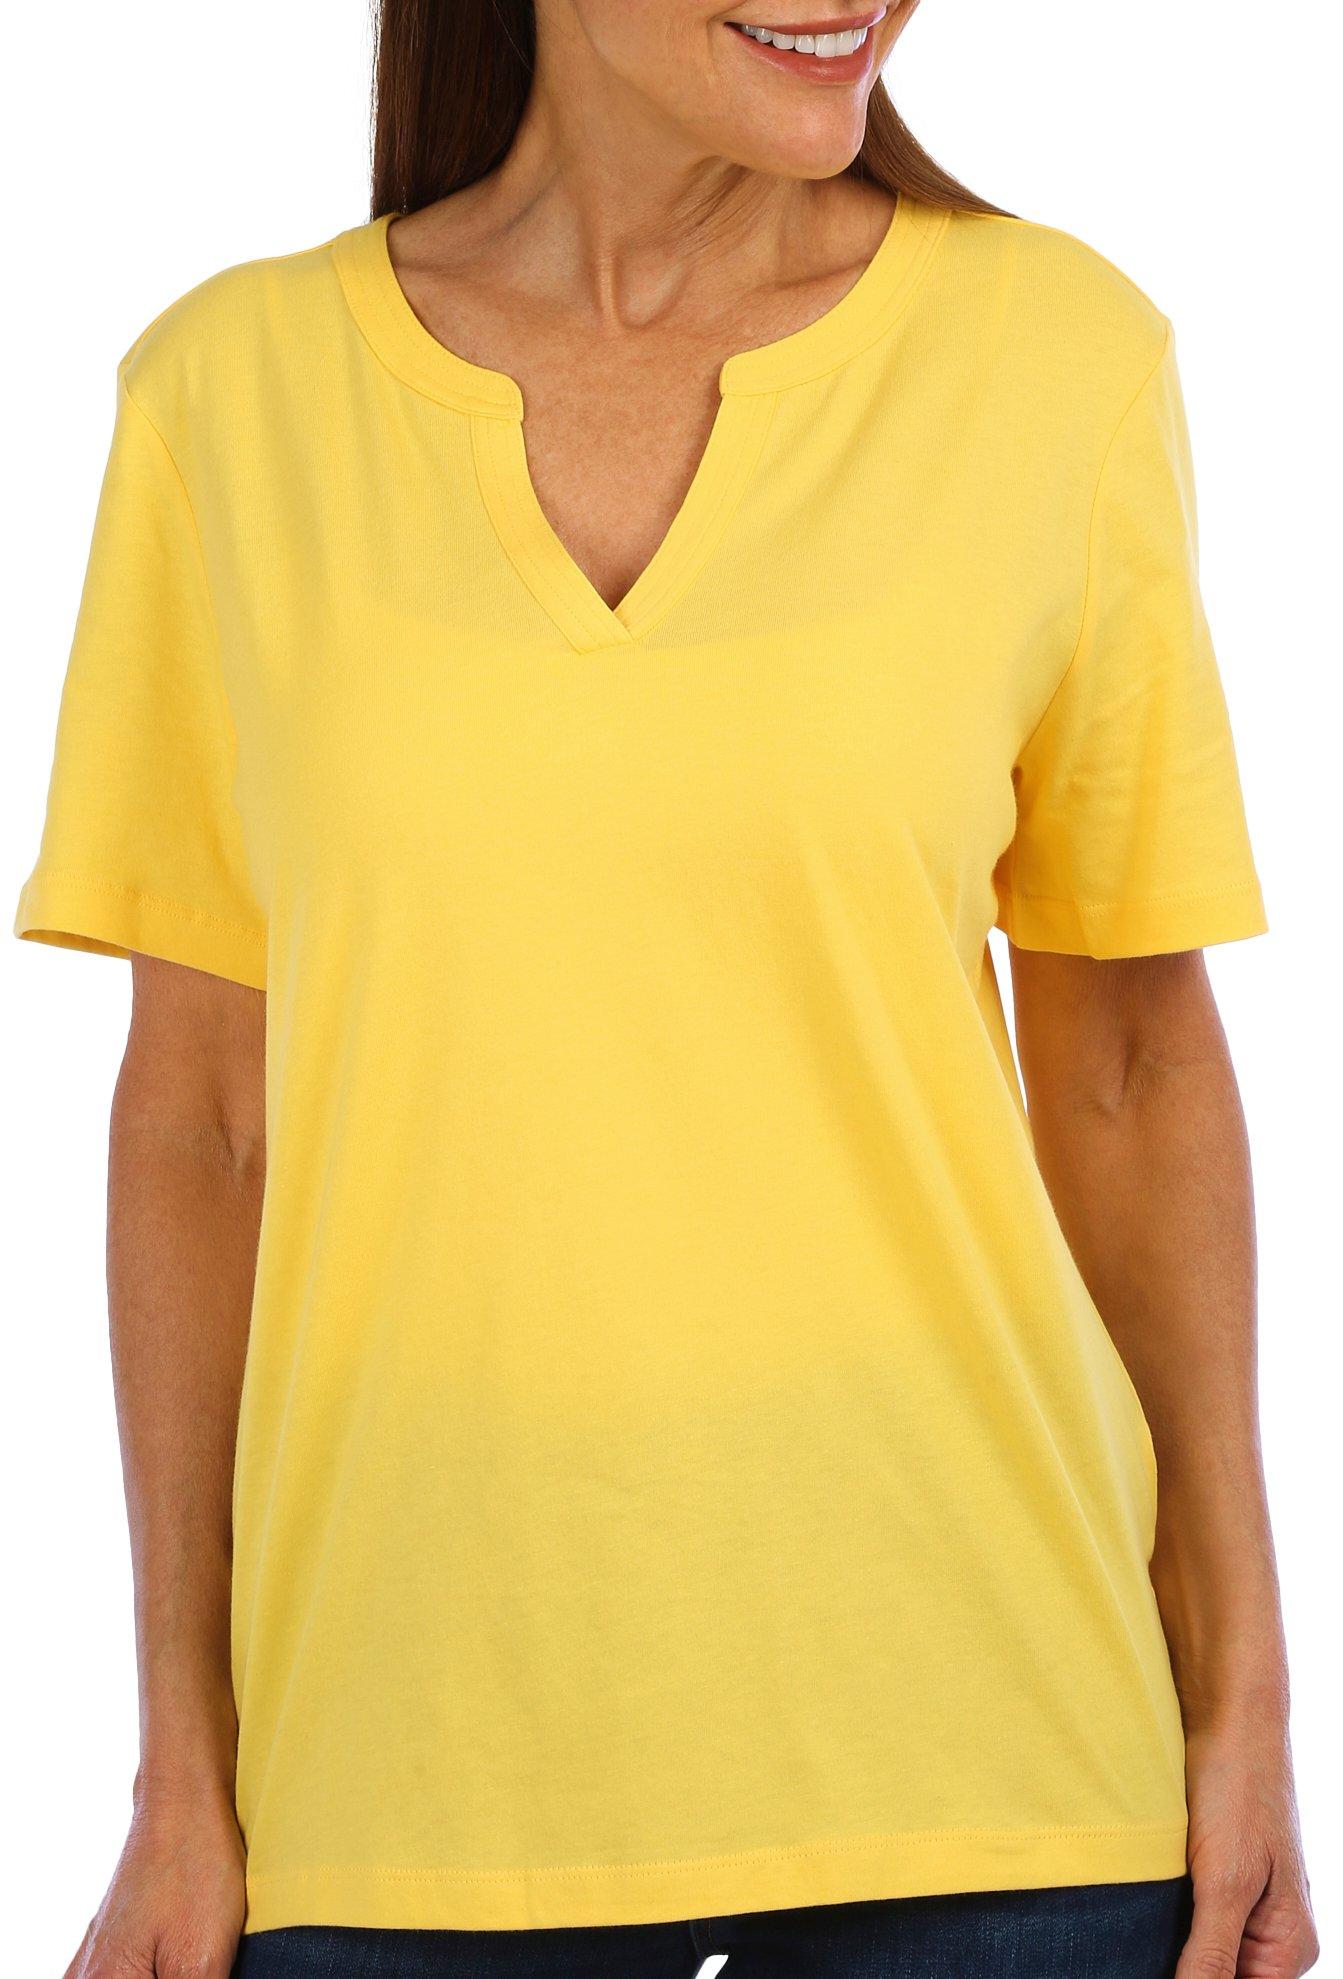 Coral Bay Womens Solid Wide Split-Neck Short Sleeve Top